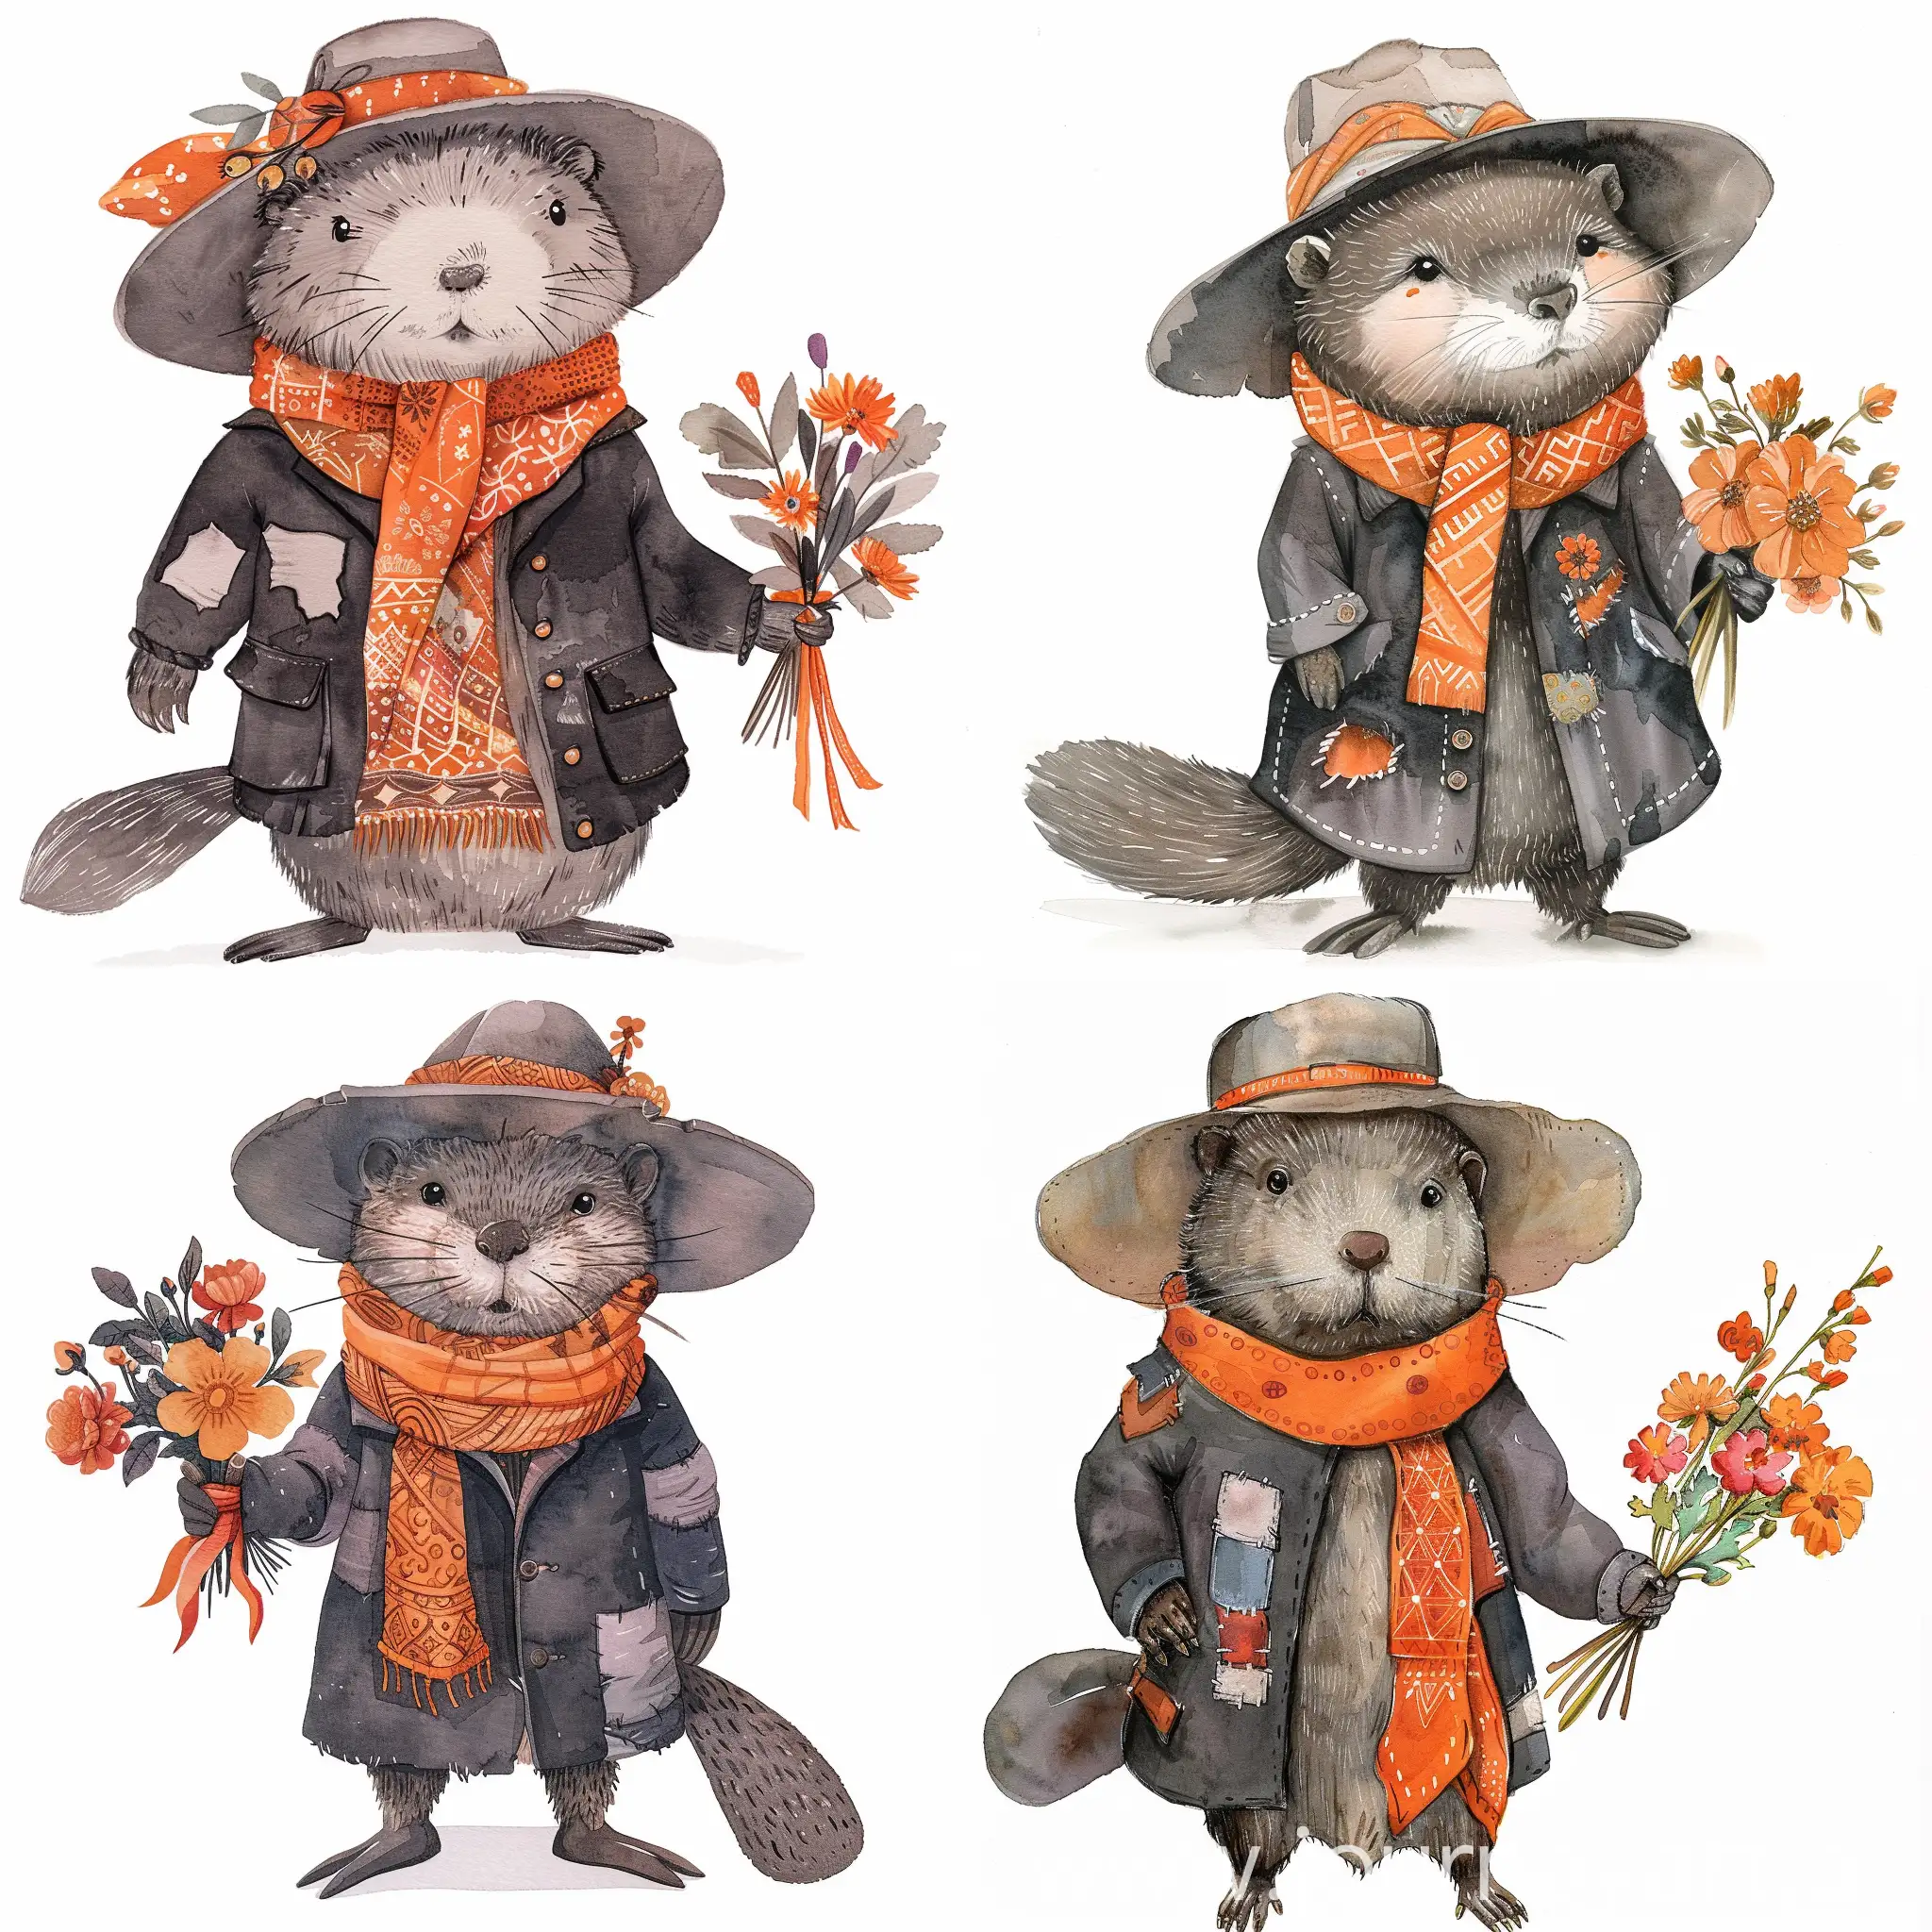 Adorable broken wash watercolor illustration of a charming beaver. The cute beaver should wear a worn and patched dark grey coat, An open orange scarf with intricate patterns tied around the neck, and a wide-brimmed hat. In its hand, it holds a bouquet of flowers. Keep the overall look whimsical and friendly for a story tale book, neutral colors.